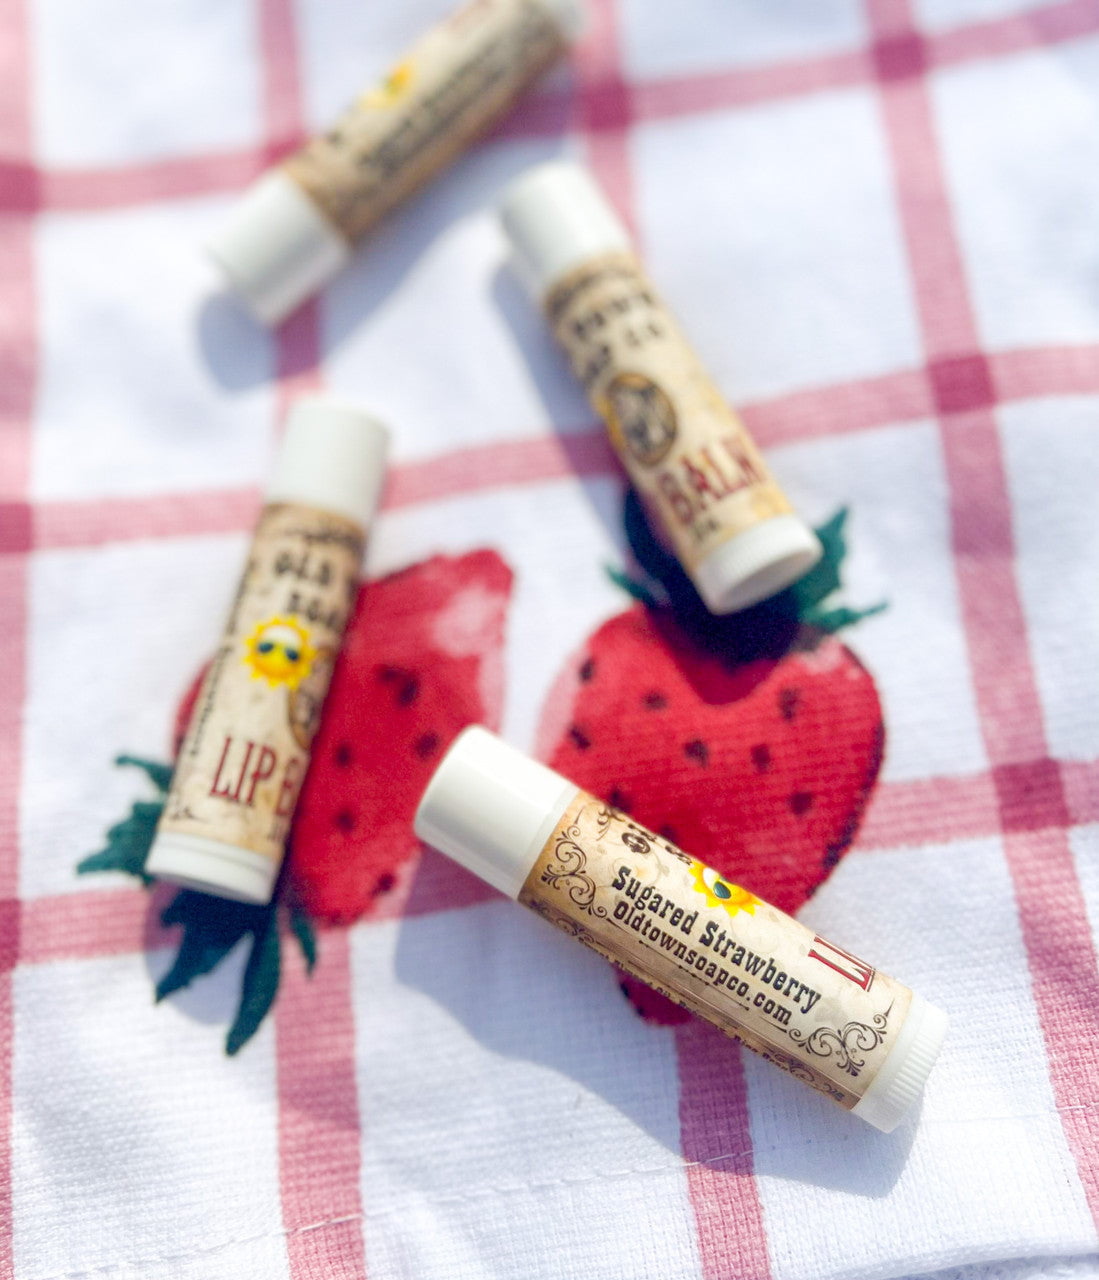 Moisturizing Lip Balm - Pick Your Flavor - Old Town Soap Co.